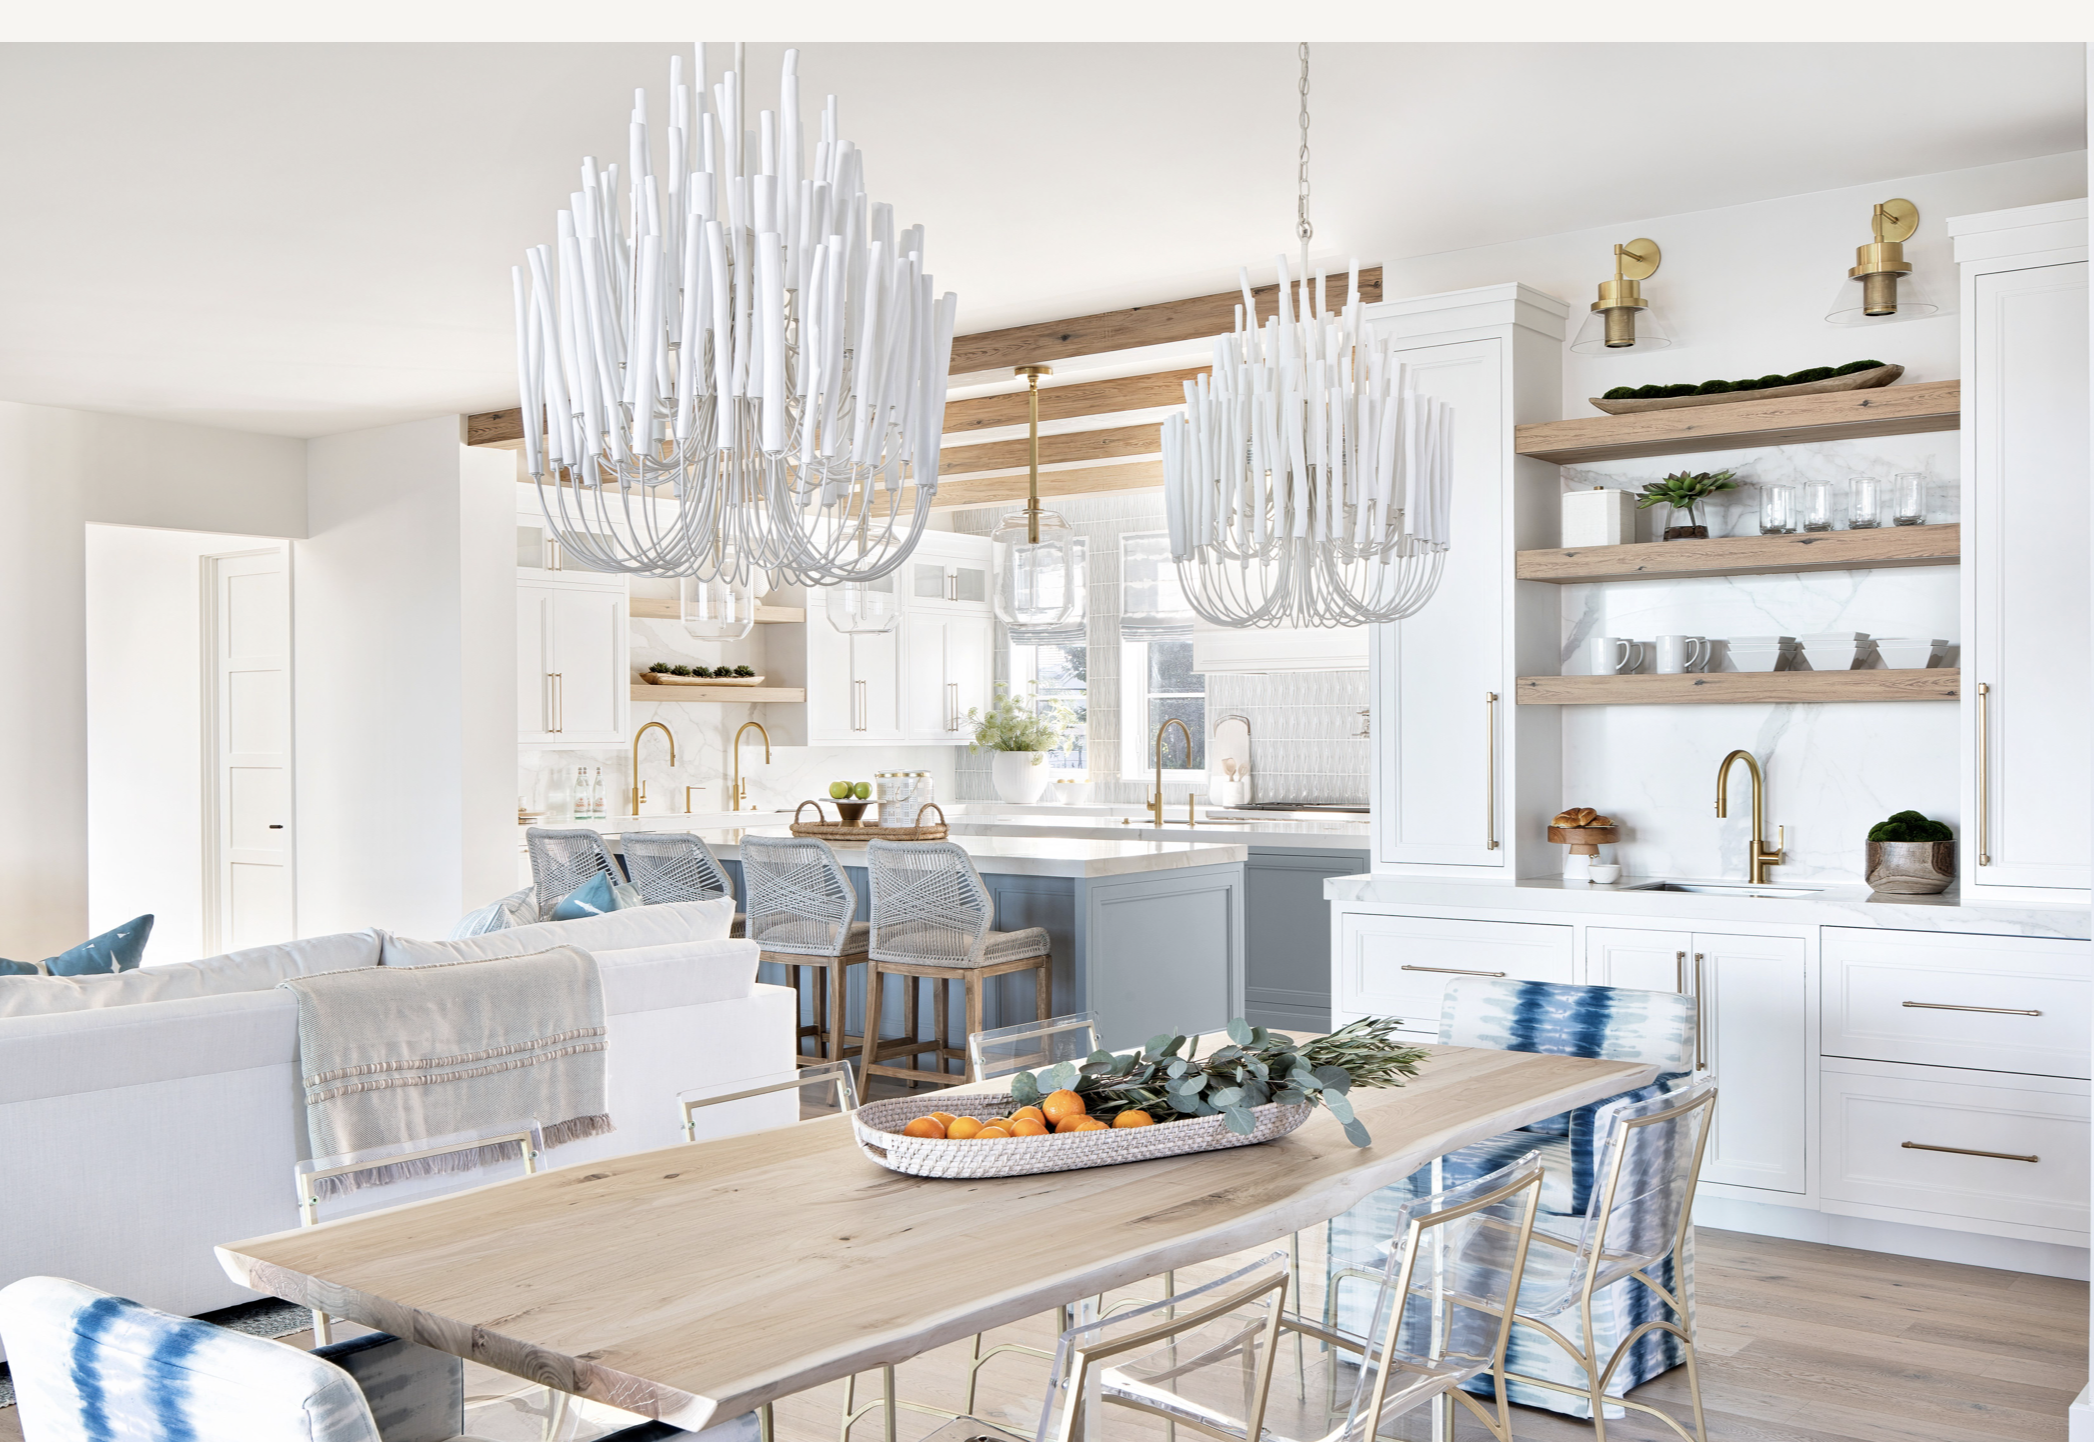 
“We love the Arteriors fixtures hung in a pair over the breakfast table,” Heather says. “They have an organic feel, while the creamy white finish keeps the vibe coastal.” Find the stools shown at the kitchen island here.

